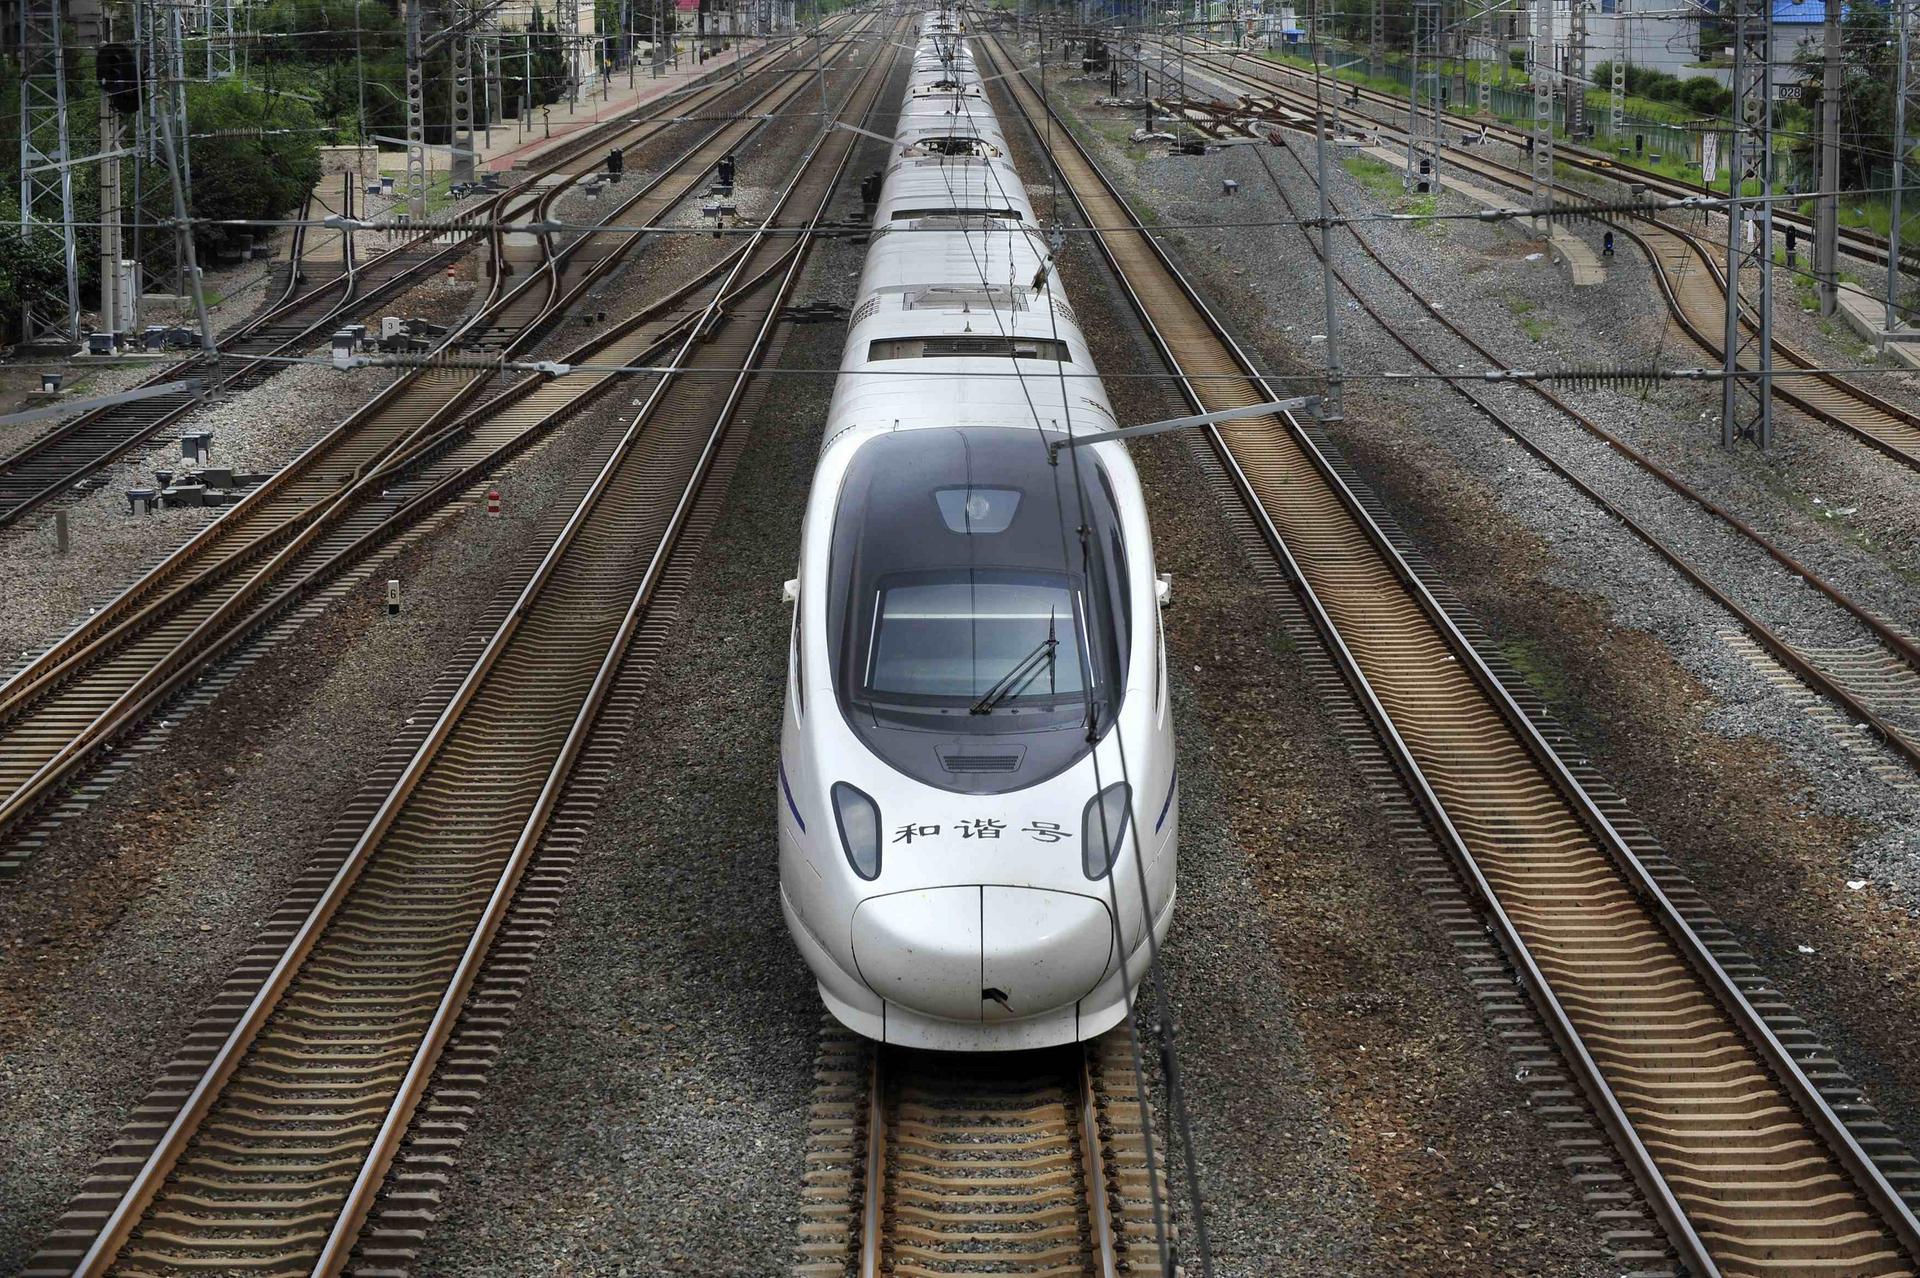 Investment in major railway projects is increasing as part of the mainland's stimulus policies aimed at boosting the economy. Photo: Reuters